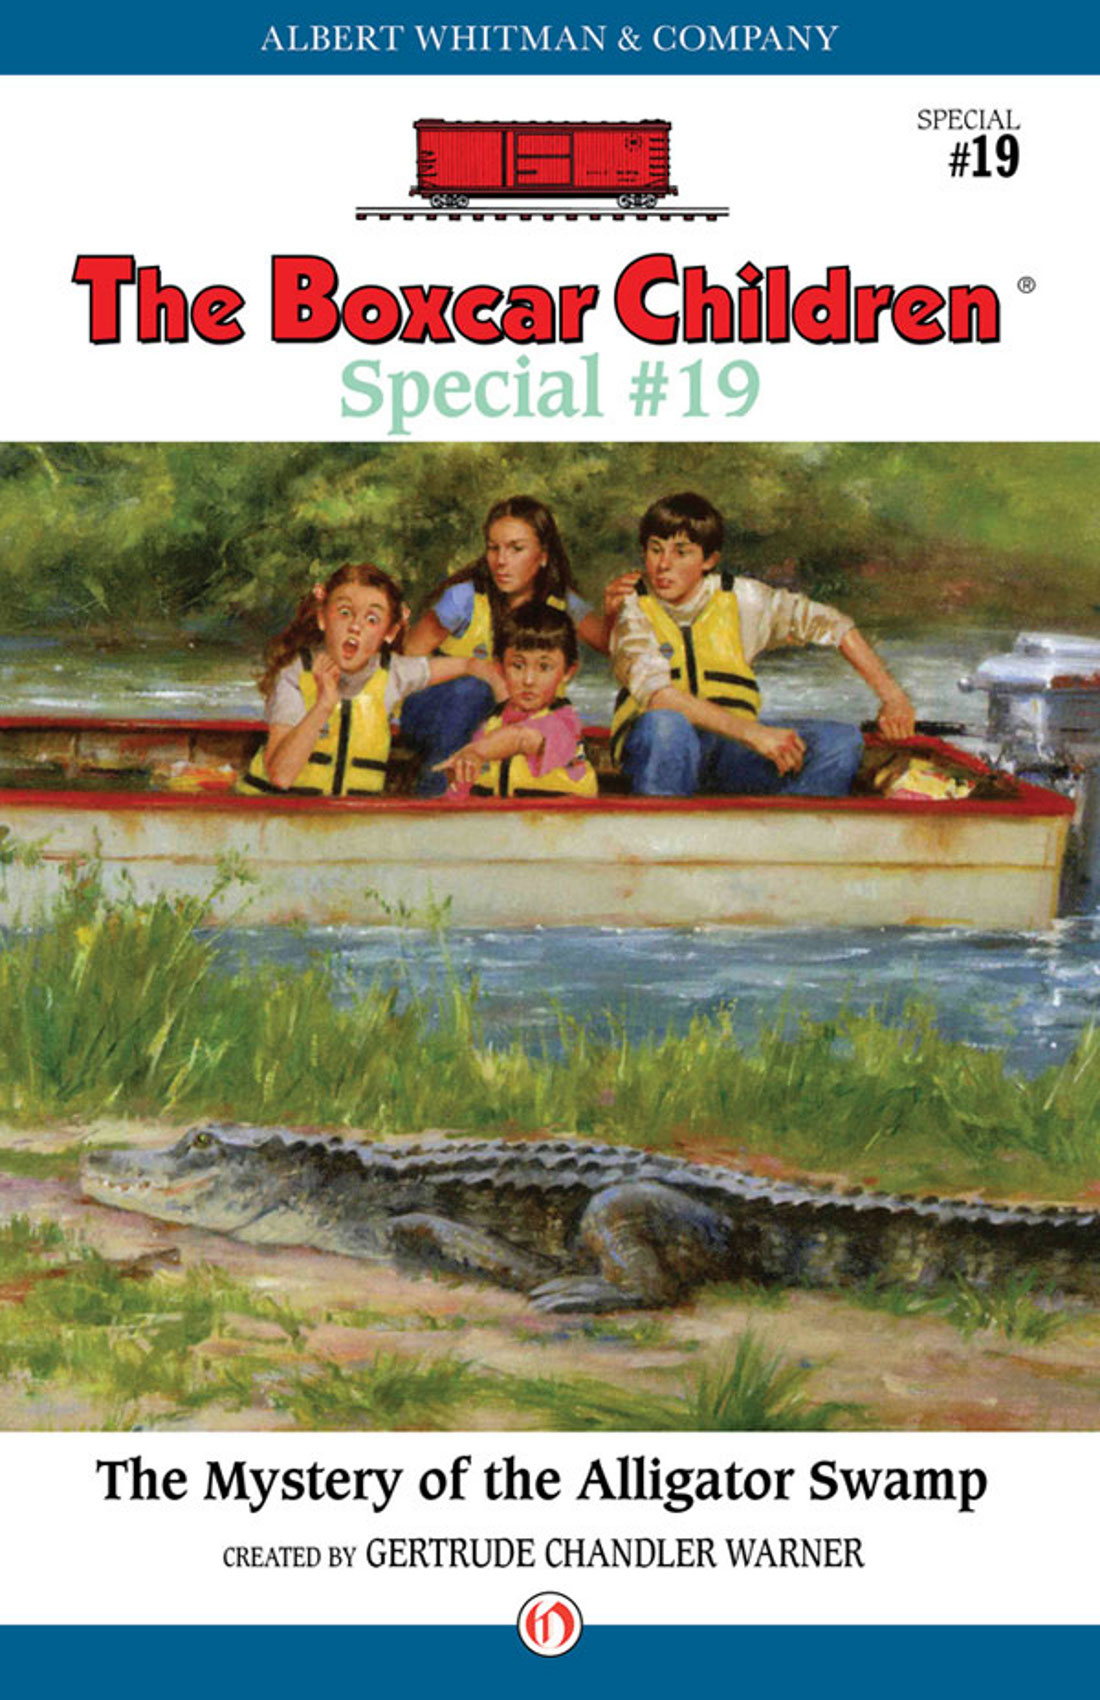 The Mystery of the Alligator Swamp by Gertrude Chandler Warner